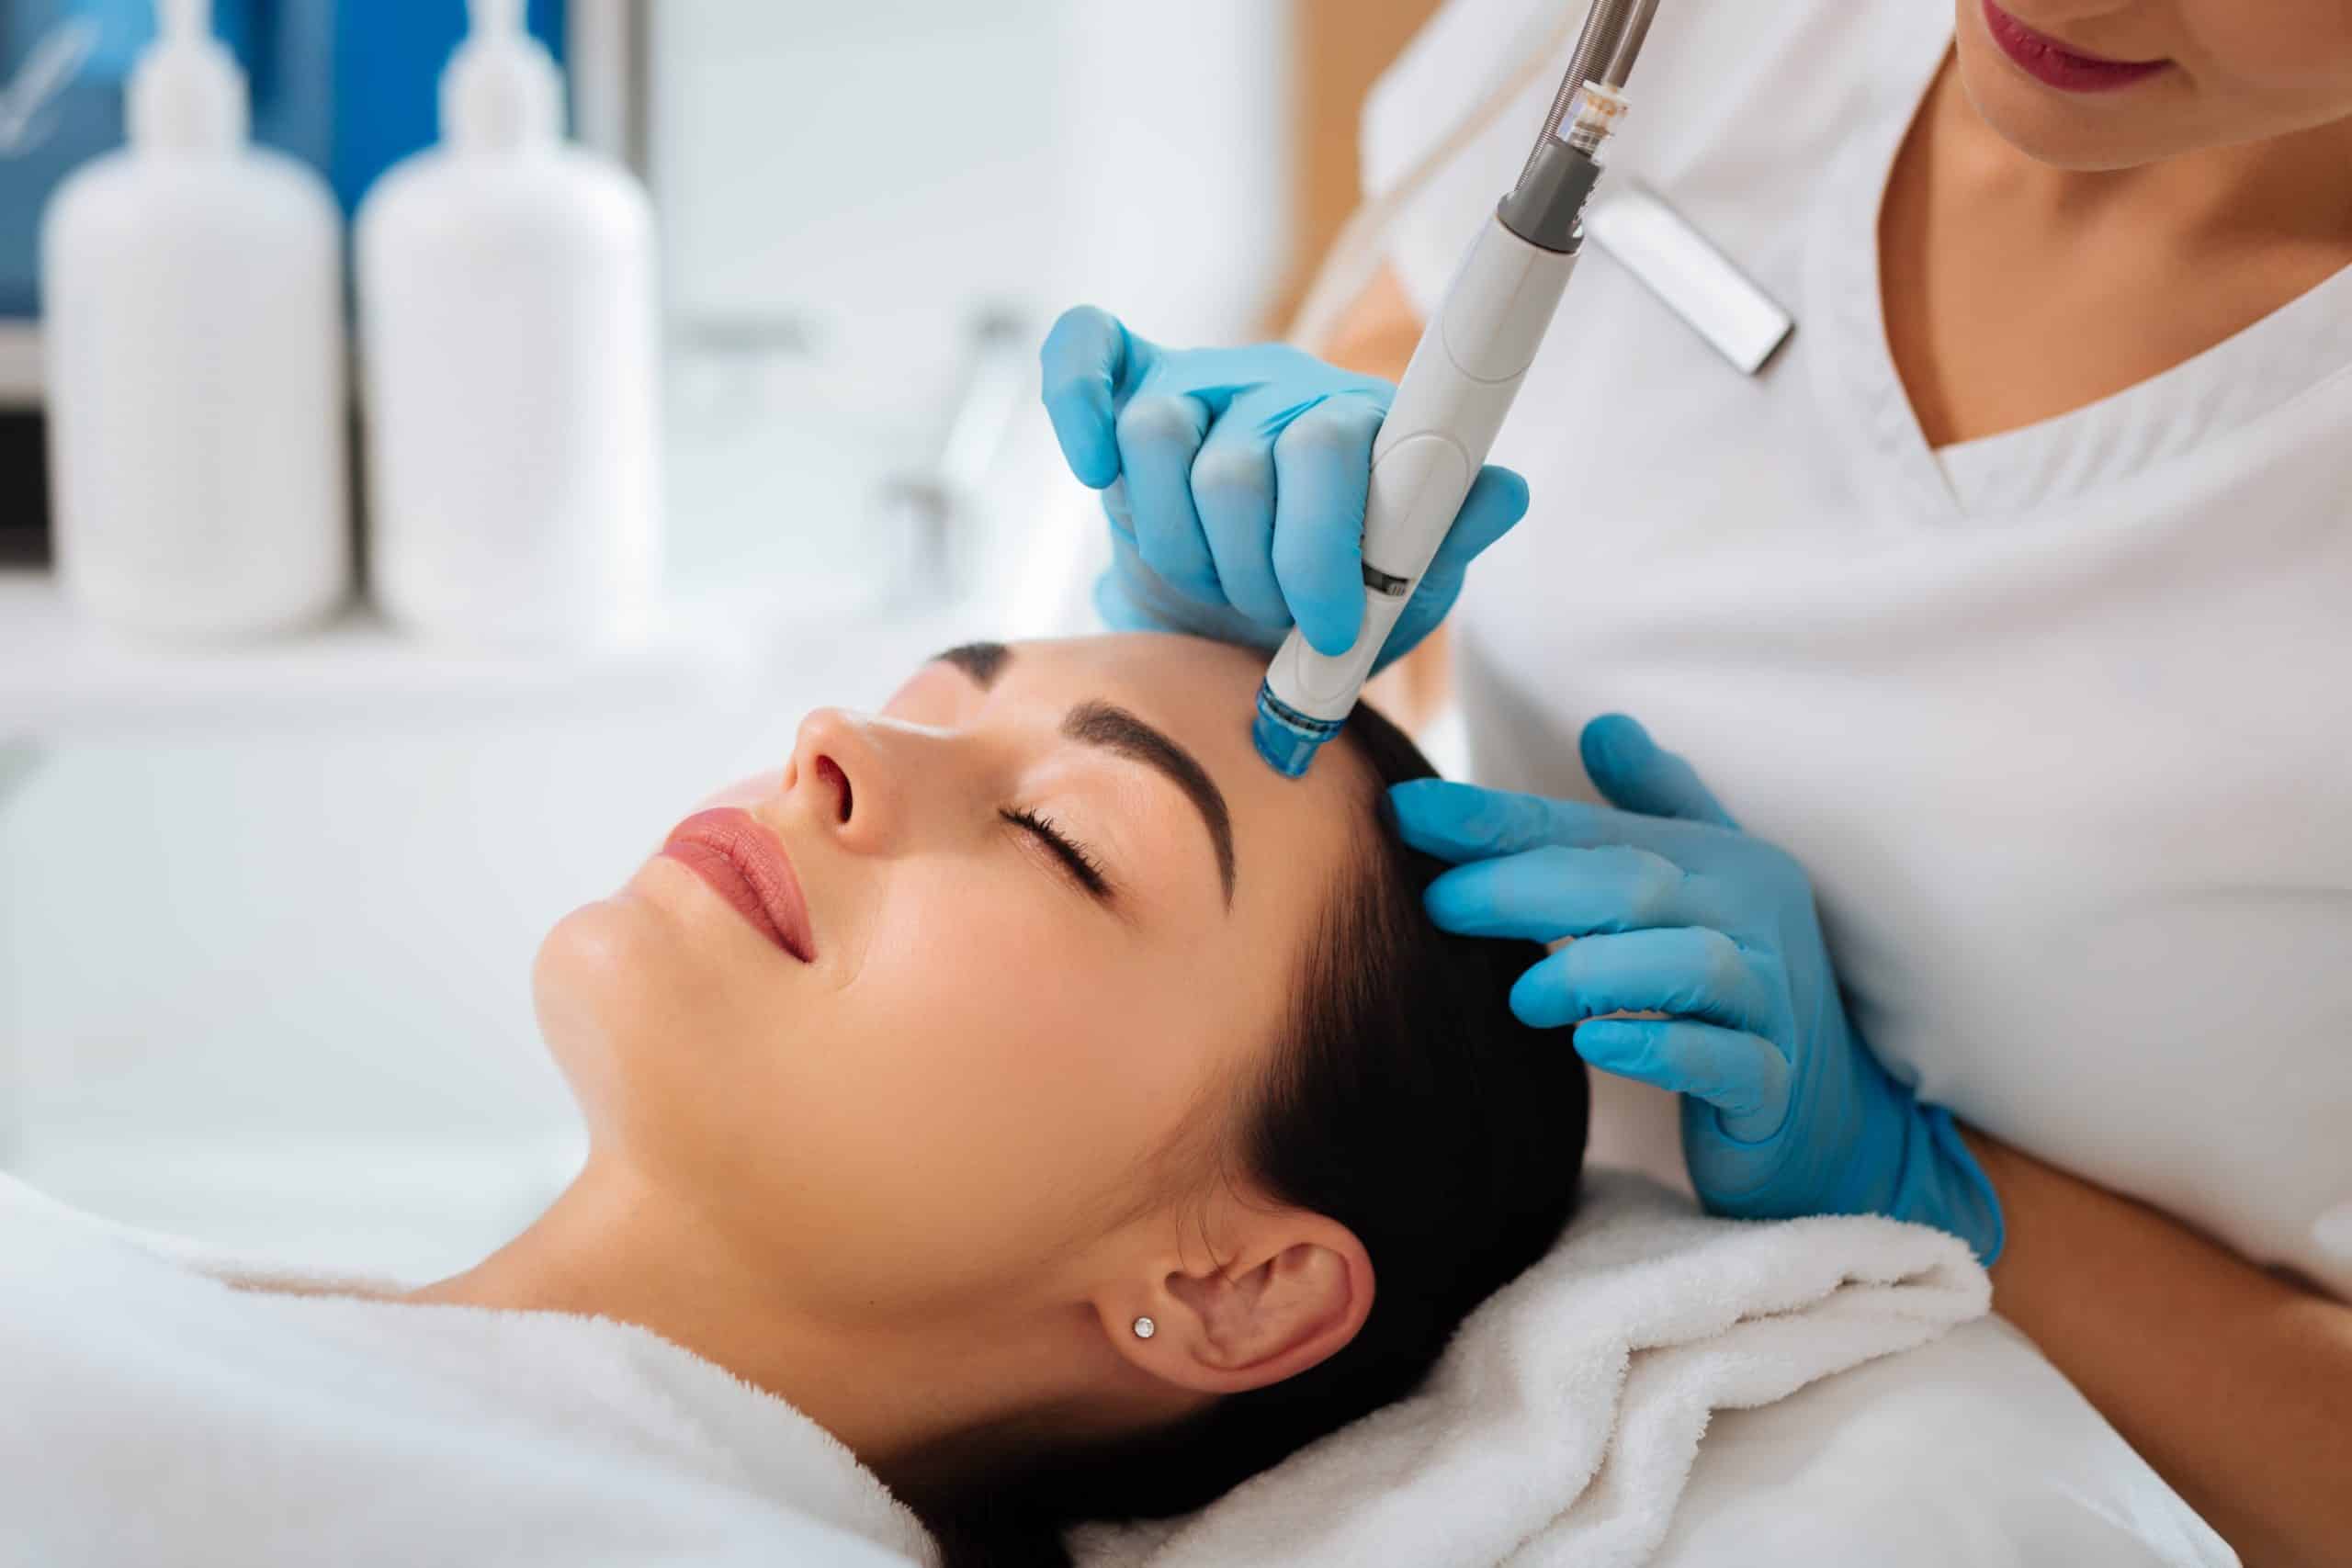 HOW HYDRAFACIAL CAN GIVE YOUR SKIN THE MOST SATISFYING GLOWING RESULTS